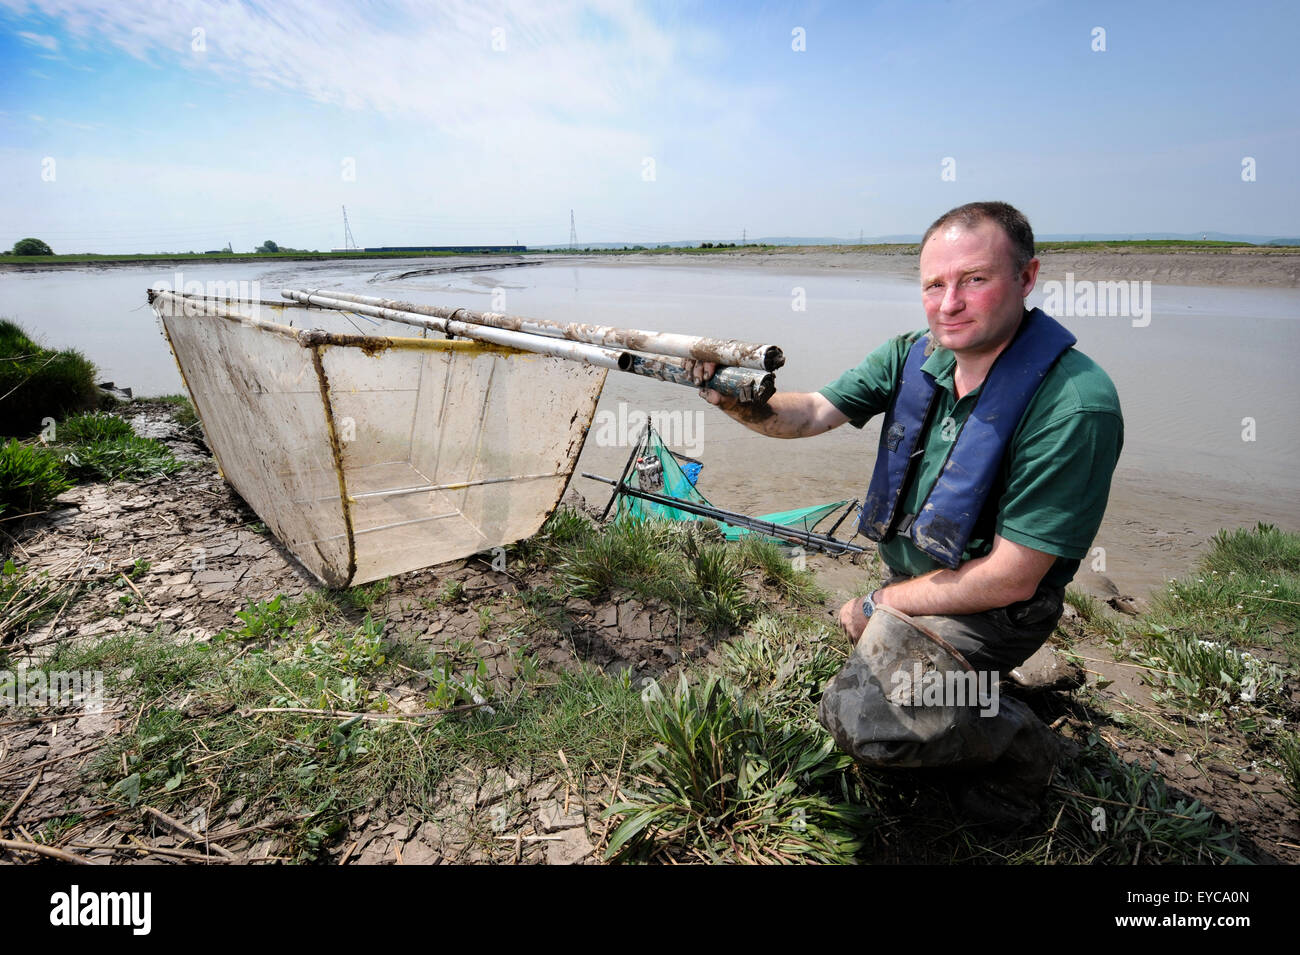 Environment Agency Bailiff Richard Dearnley with a confiscated oversized elver net and an illegal flow net (behind) on the banks Stock Photo